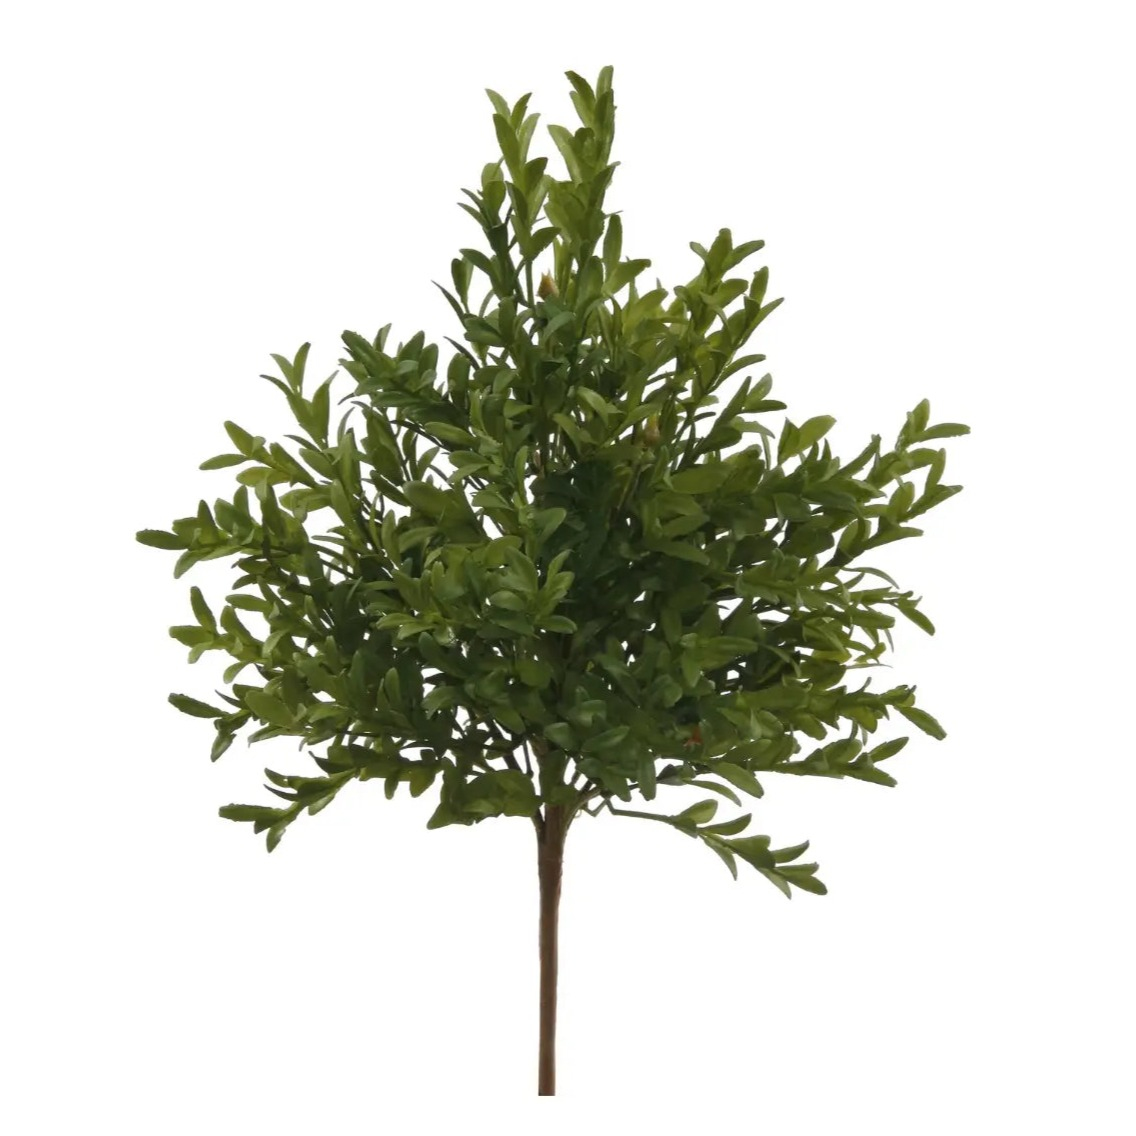 Home Smith English Boxwood Bundles Winward Stems, Blooms & Branches